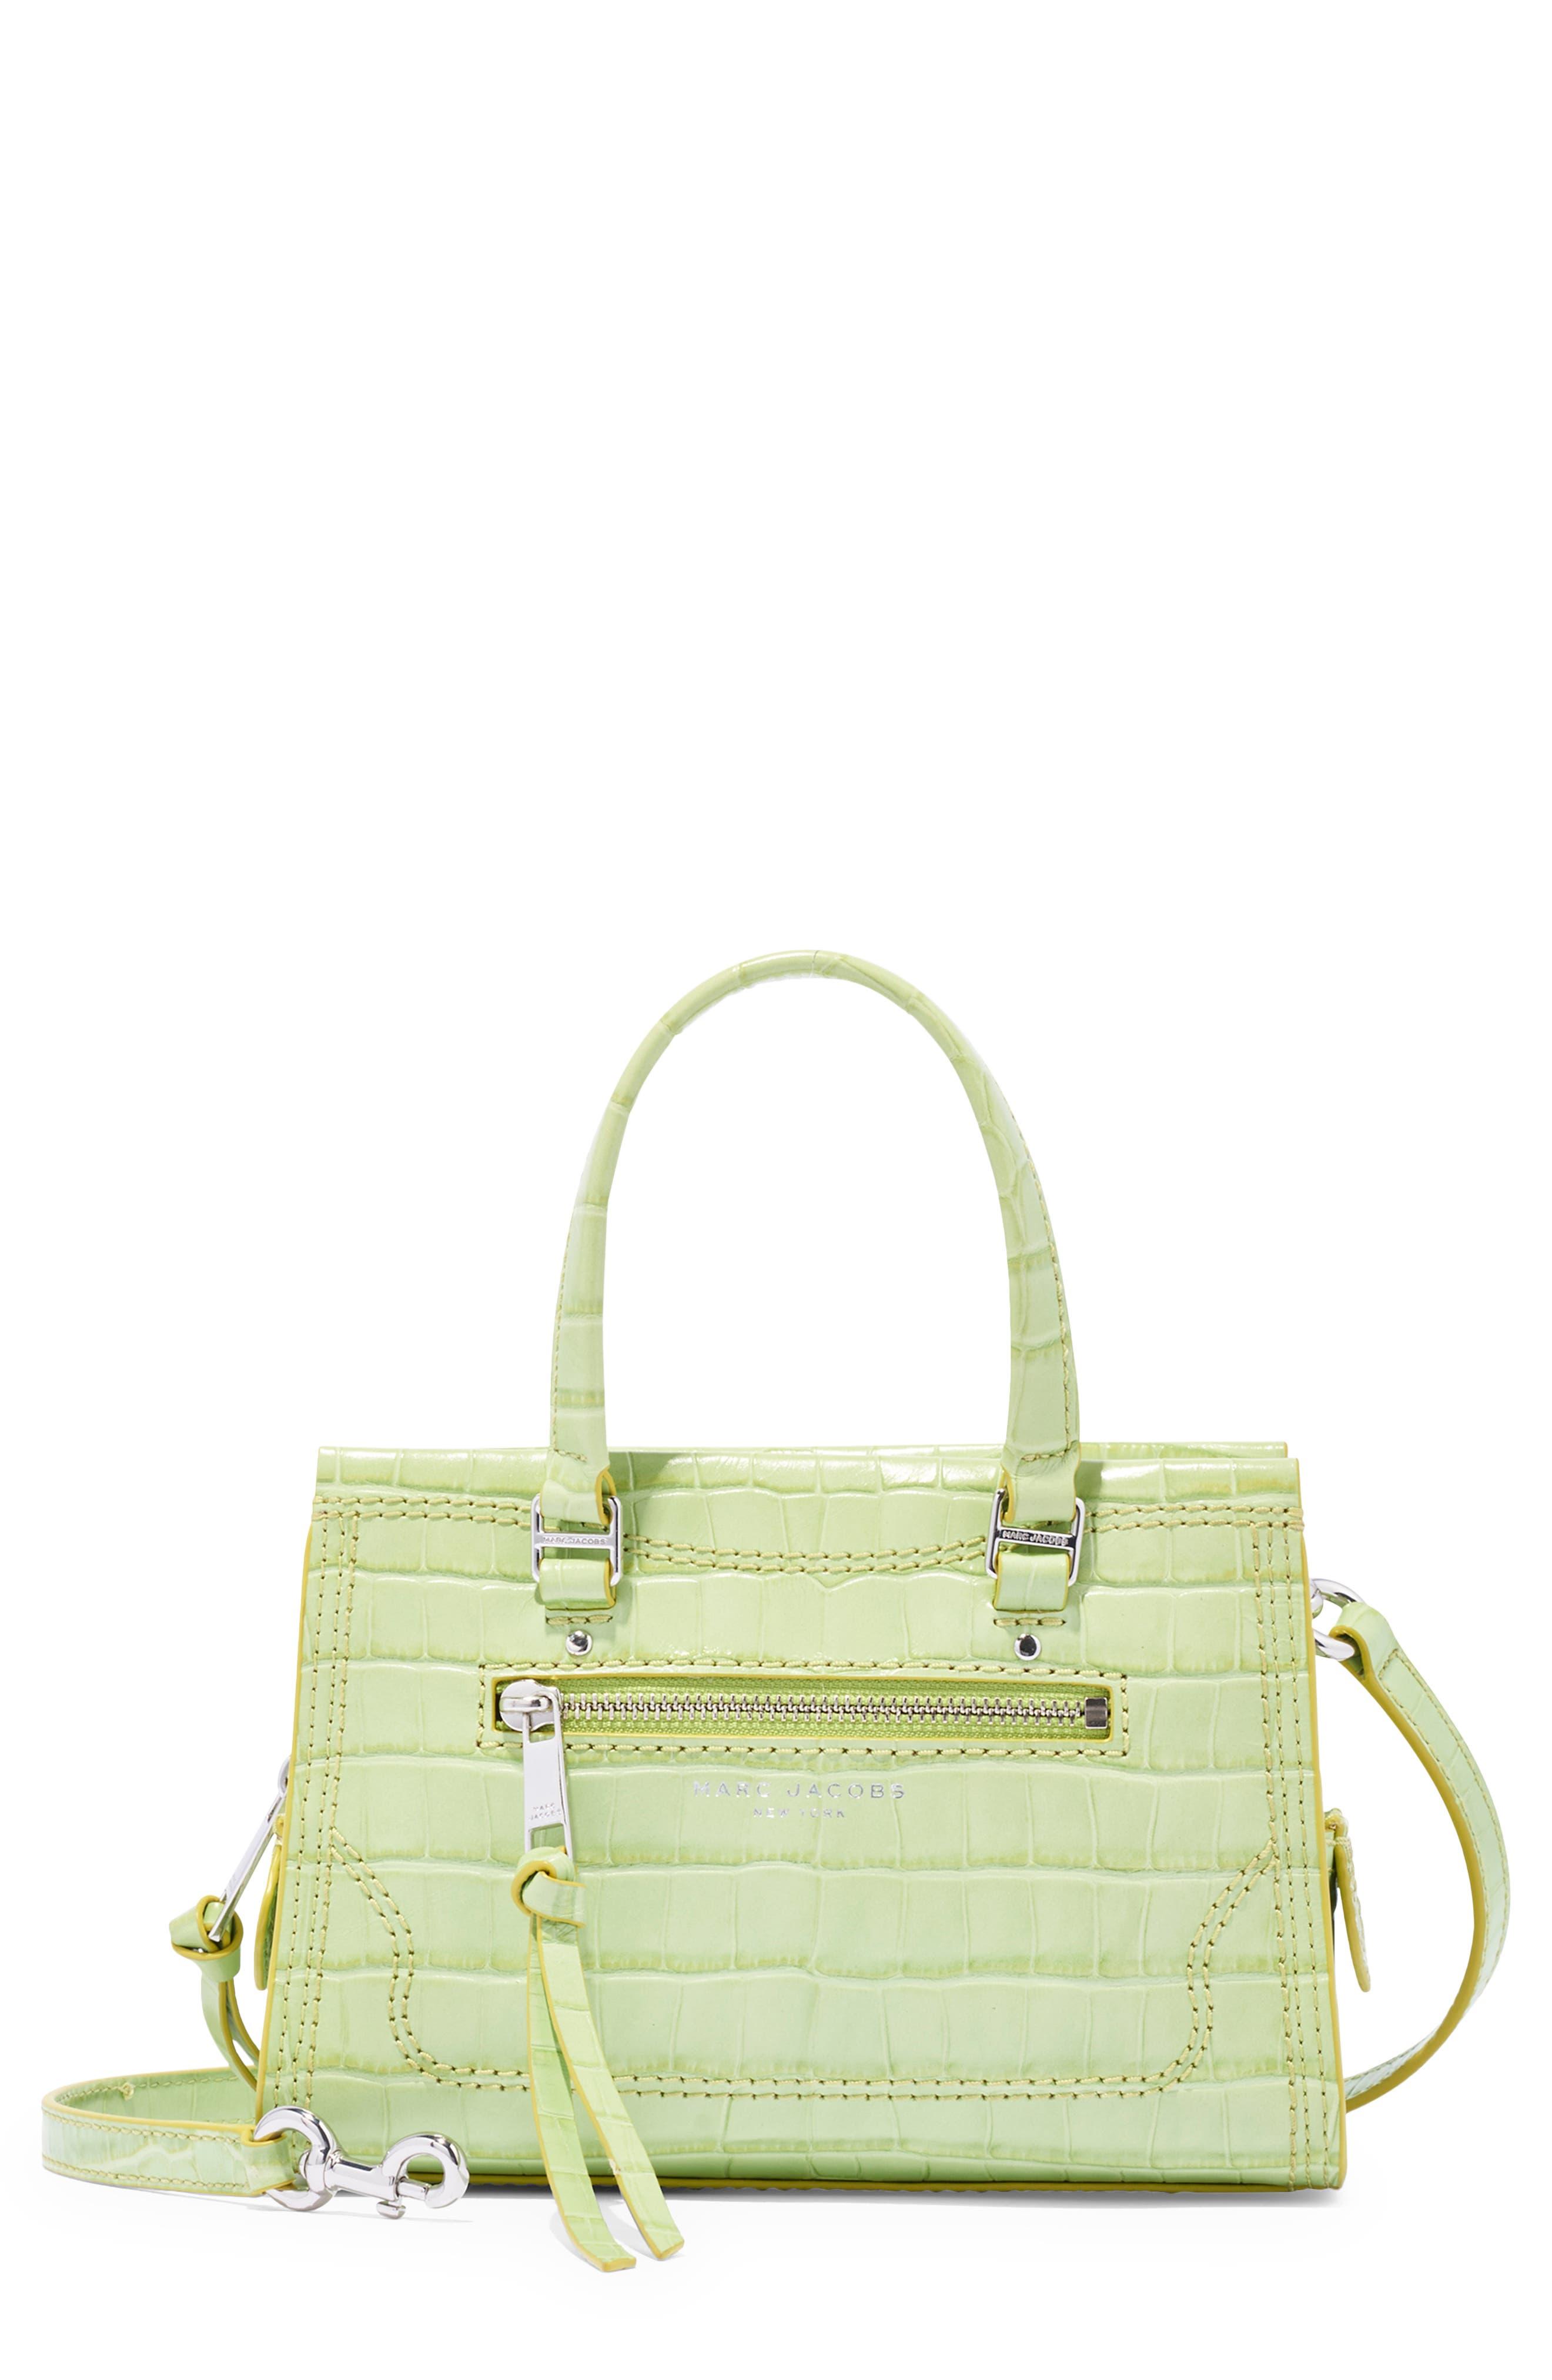 Marc Jacobs Mini Cruiser Satchel In Pear At Nordstrom Rack in Green | Lyst